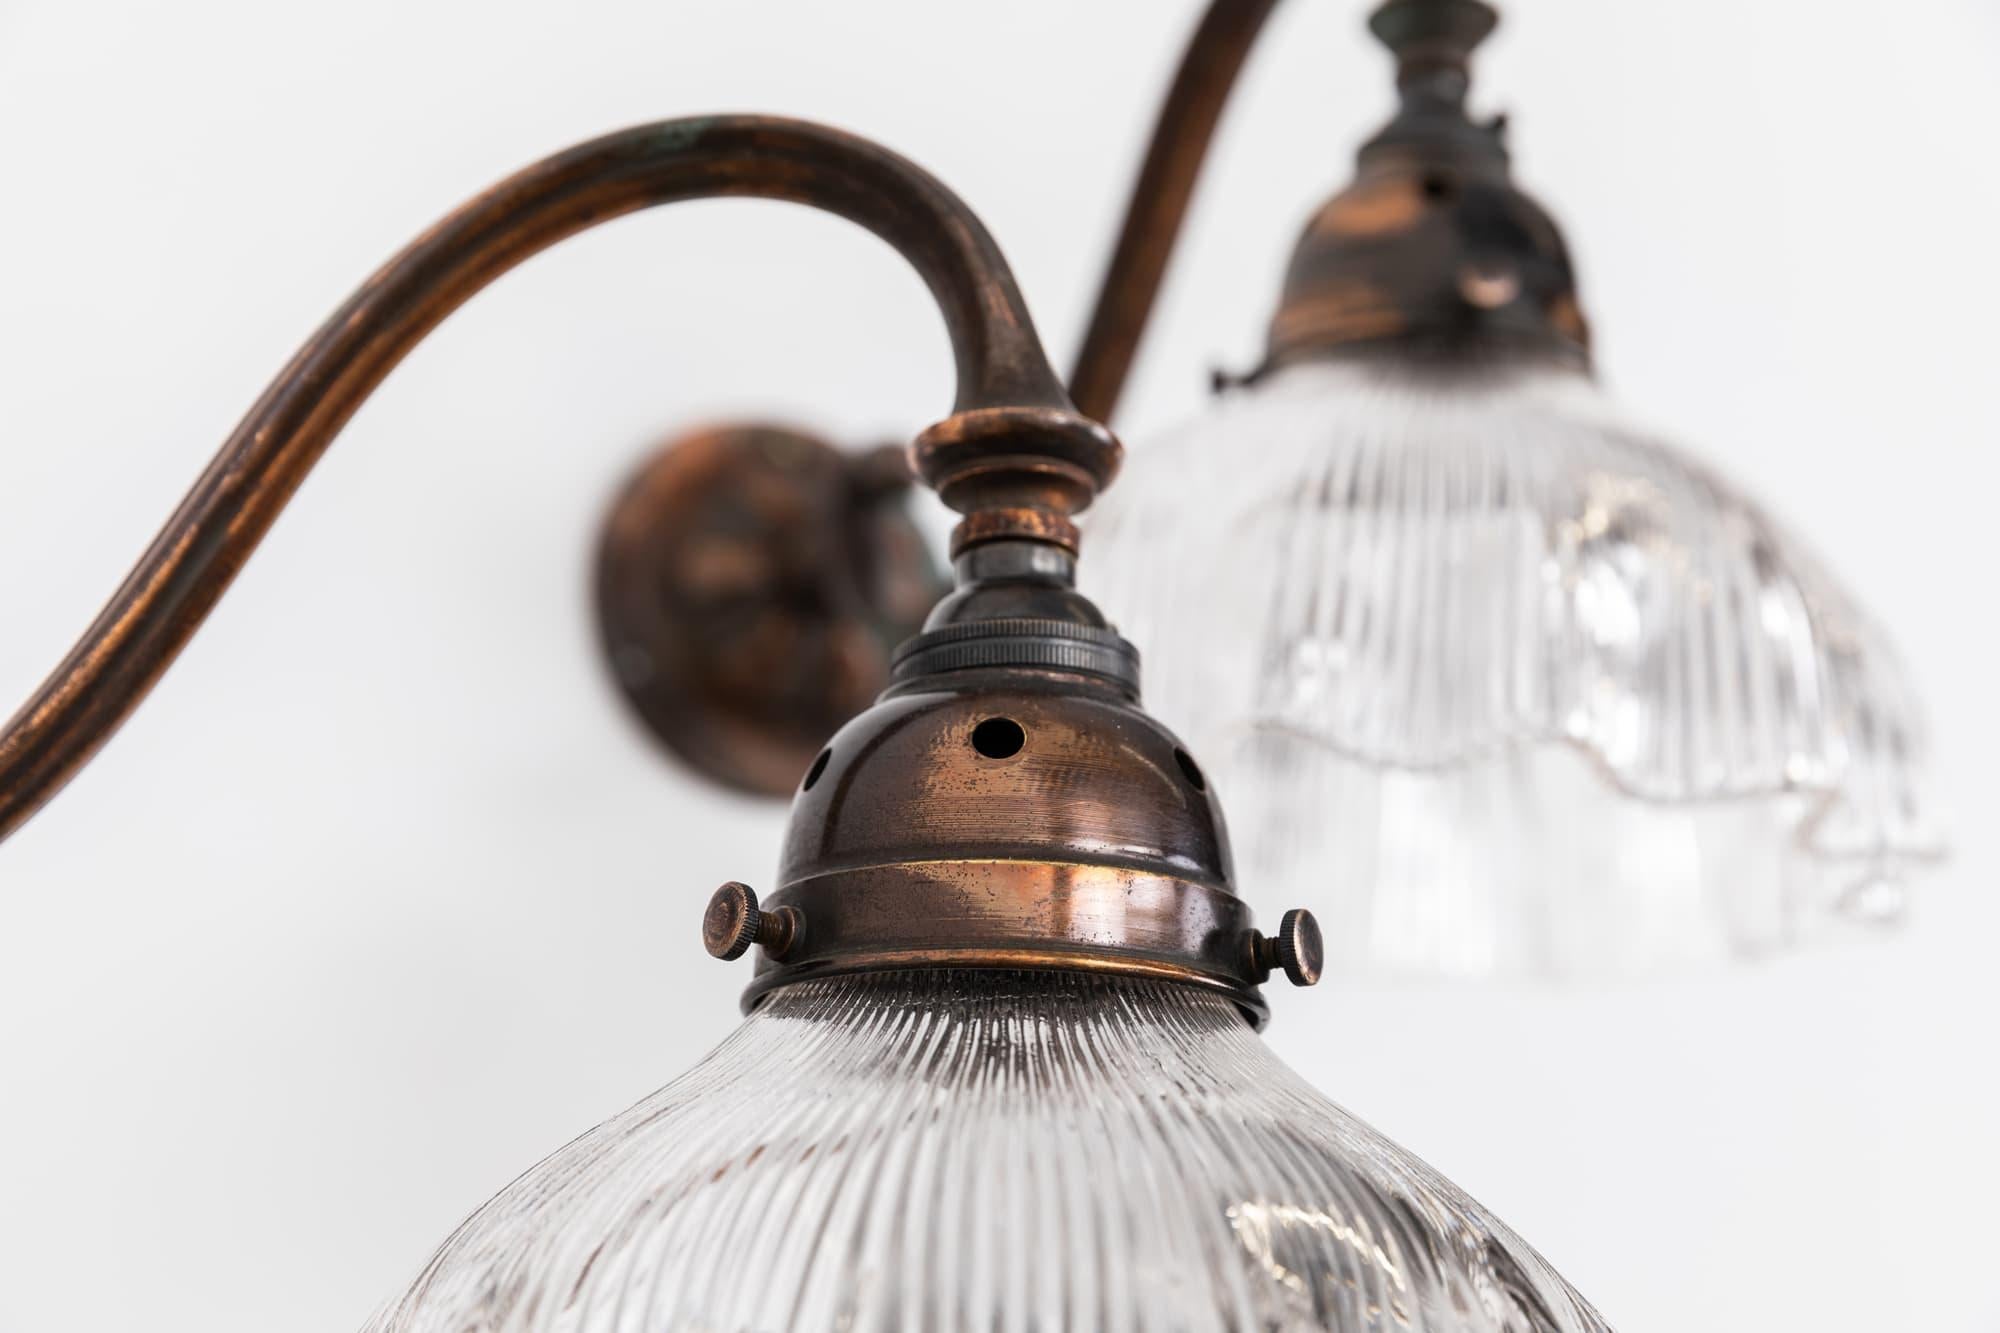 

A pair of oxy-copper plated swan neck wall lights made in England by GEC. c.1930

Brass construction with beautifully tarnished copper plate. Prismatic glass lamp shades and original copper galleries. Priced as a pair.

Rewired to connect to